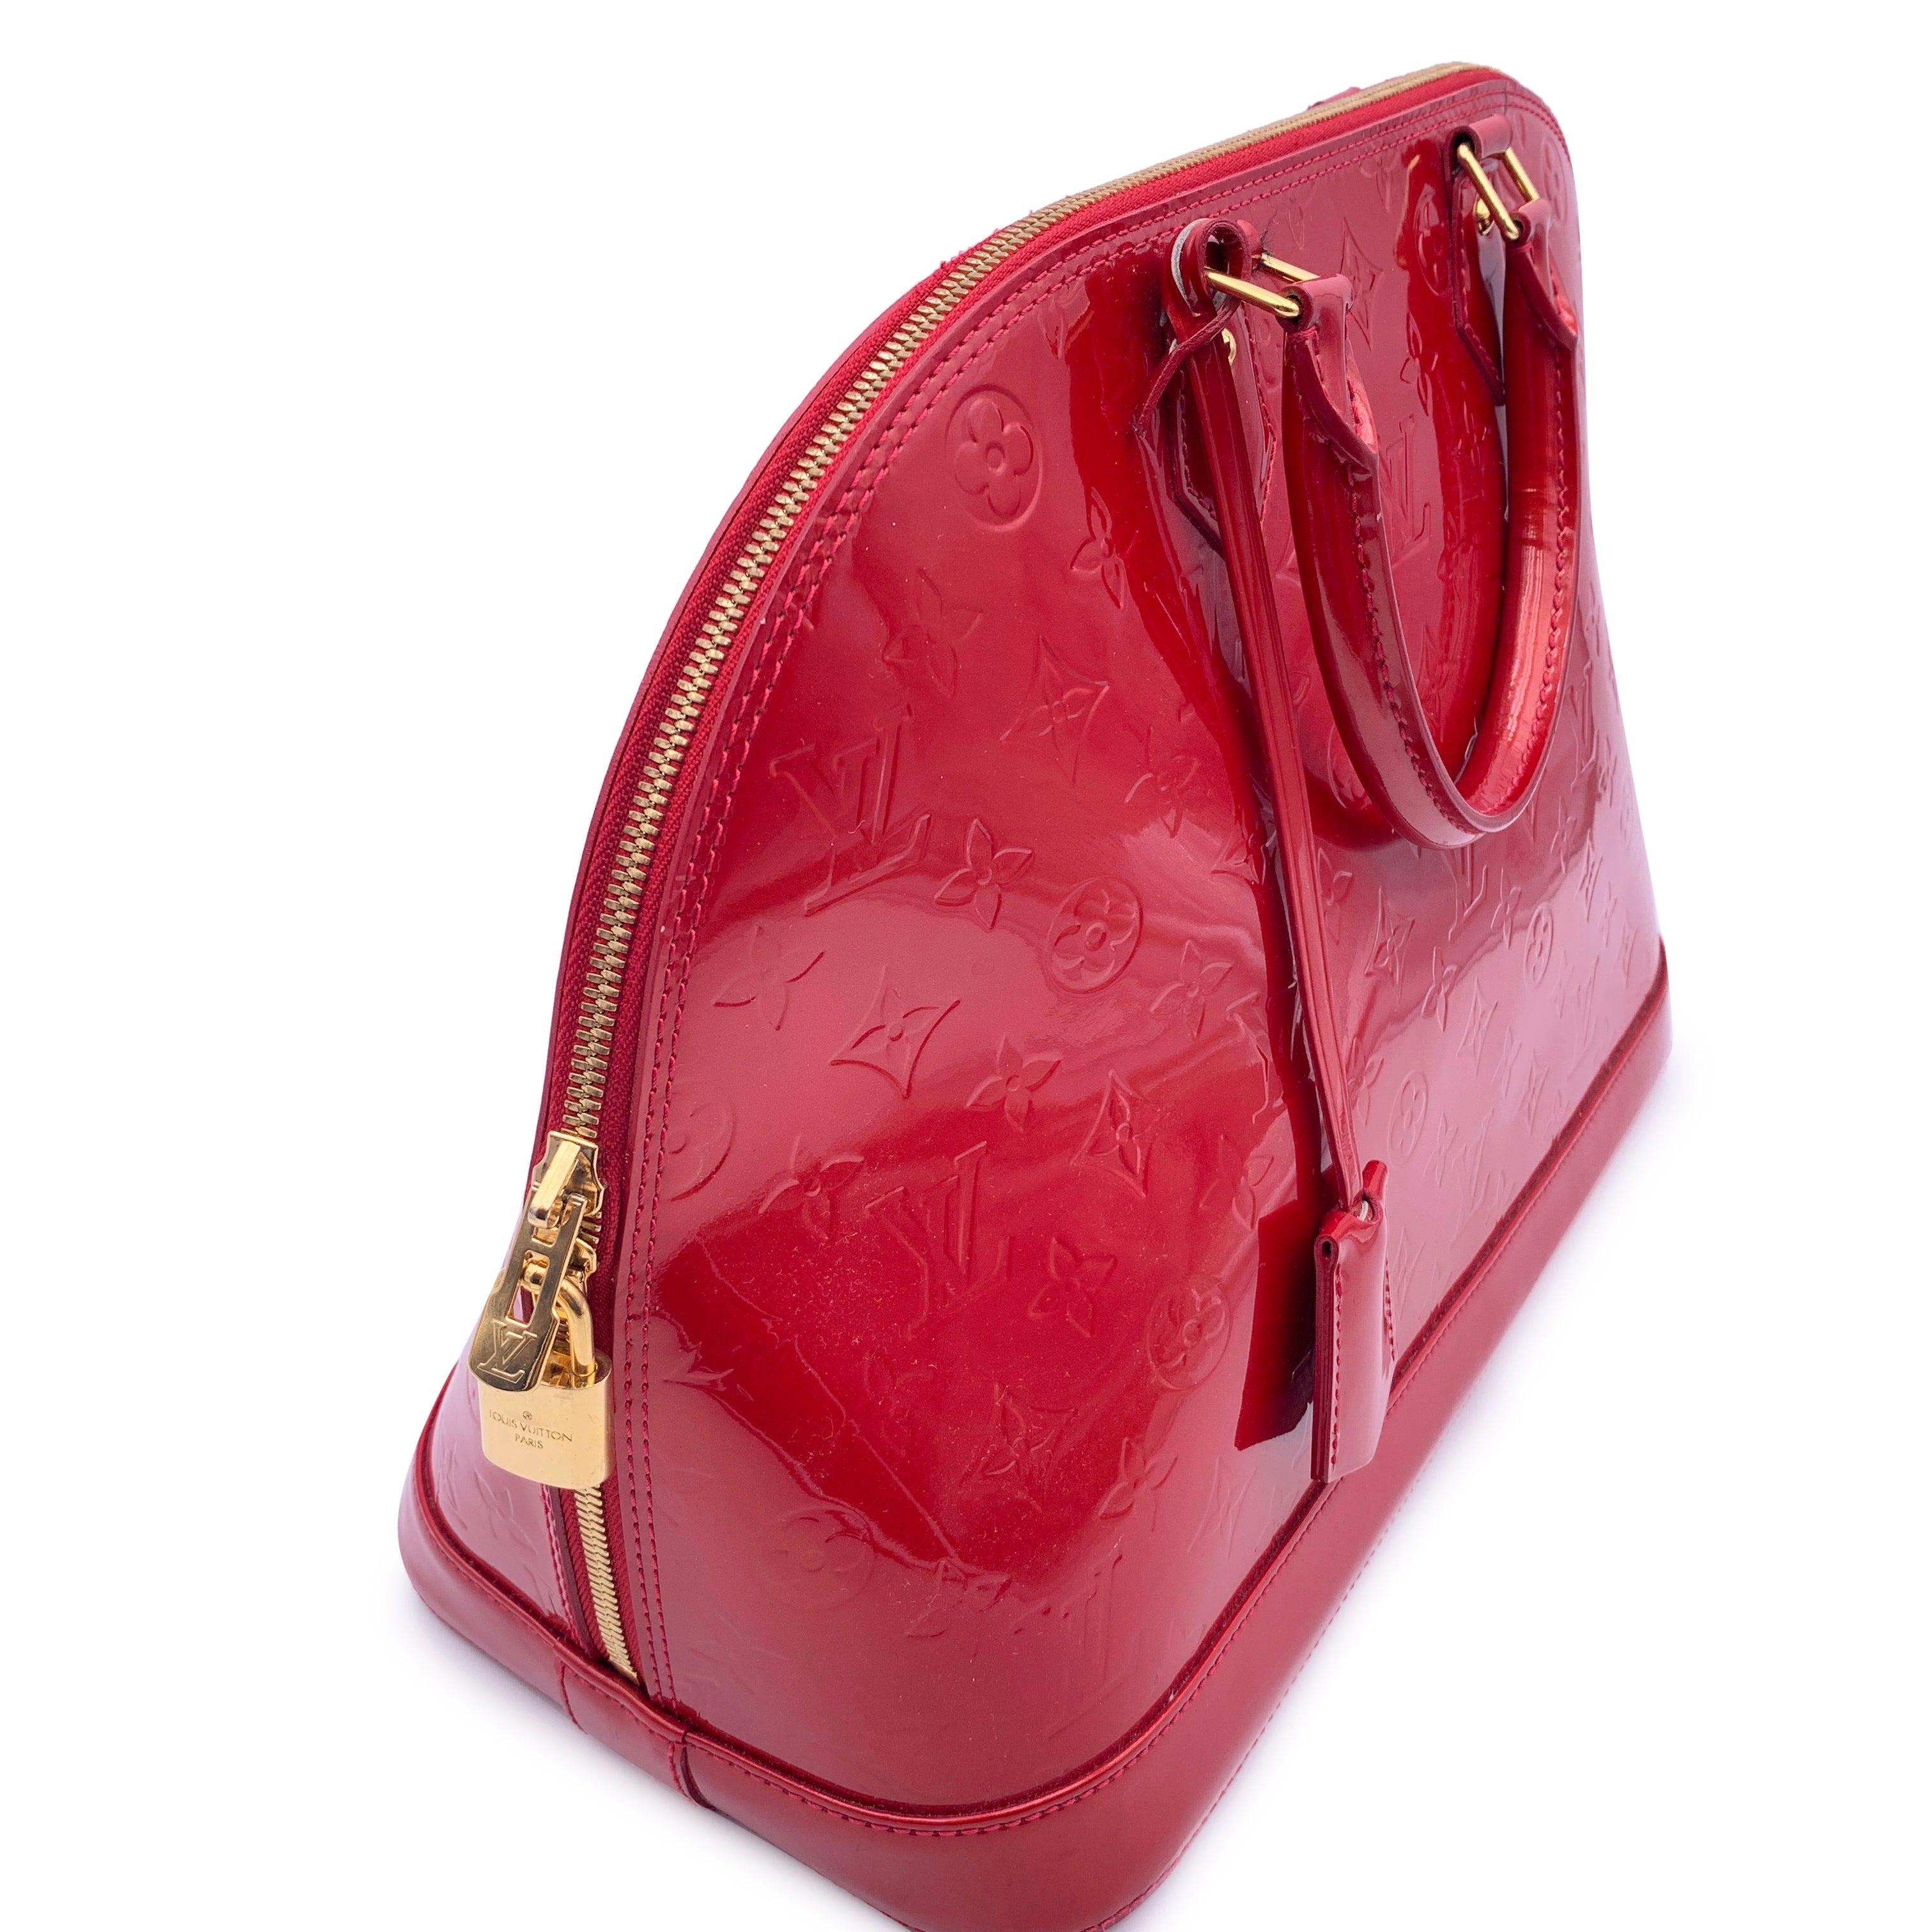 Louis Vuitton Red Pomme D'Amour Monogram Vernis Alma GM Bag In Good Condition For Sale In Rome, Rome